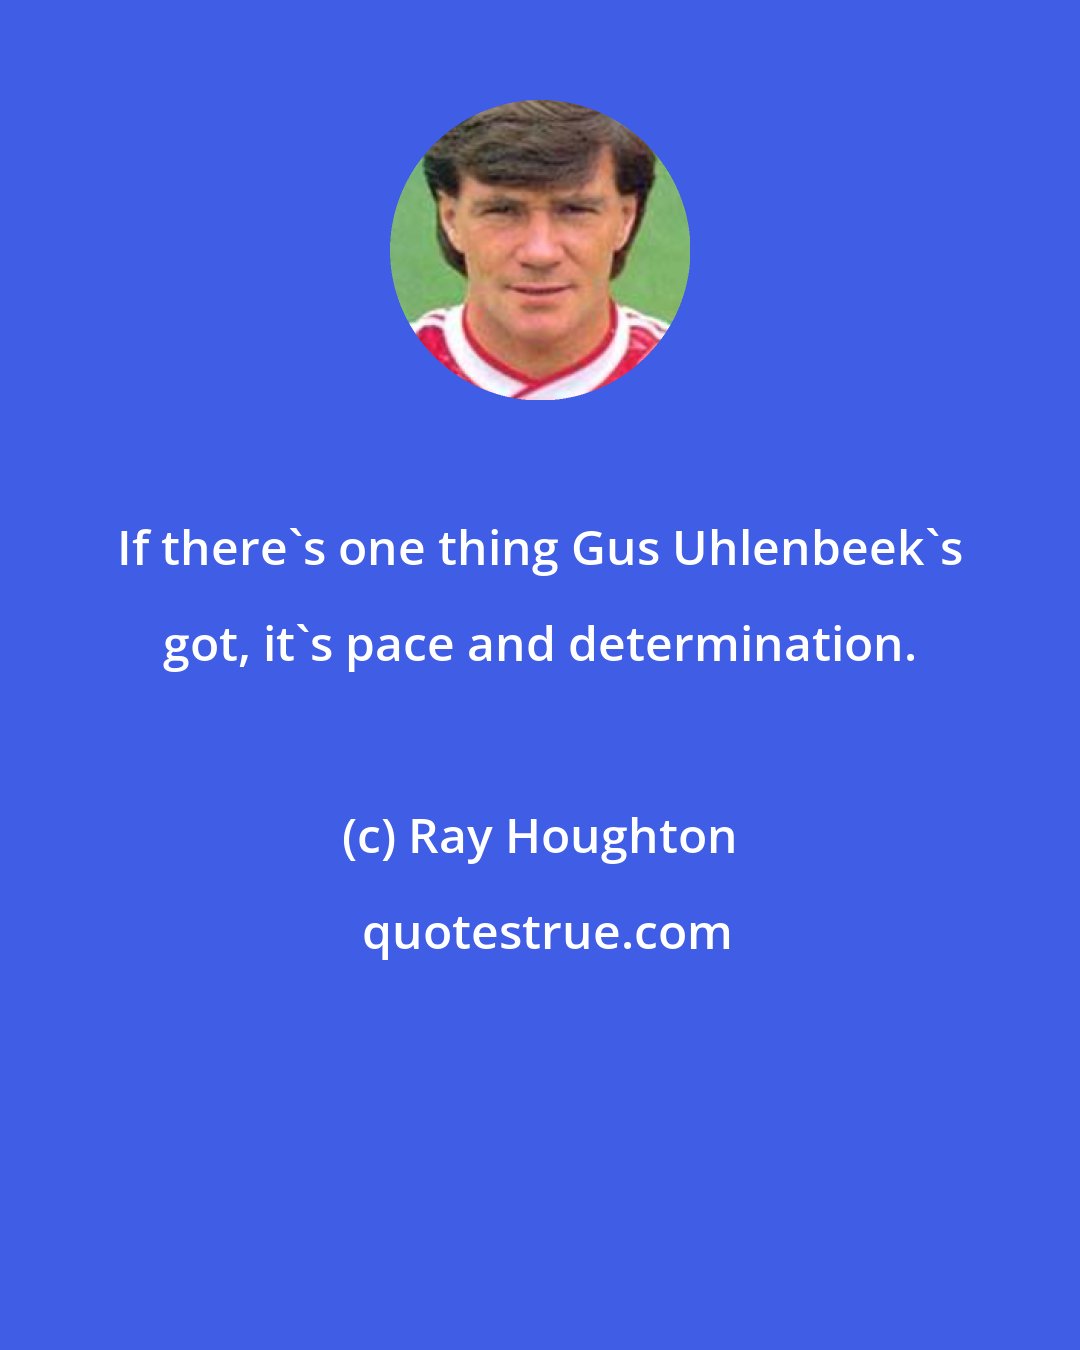 Ray Houghton: If there's one thing Gus Uhlenbeek's got, it's pace and determination.